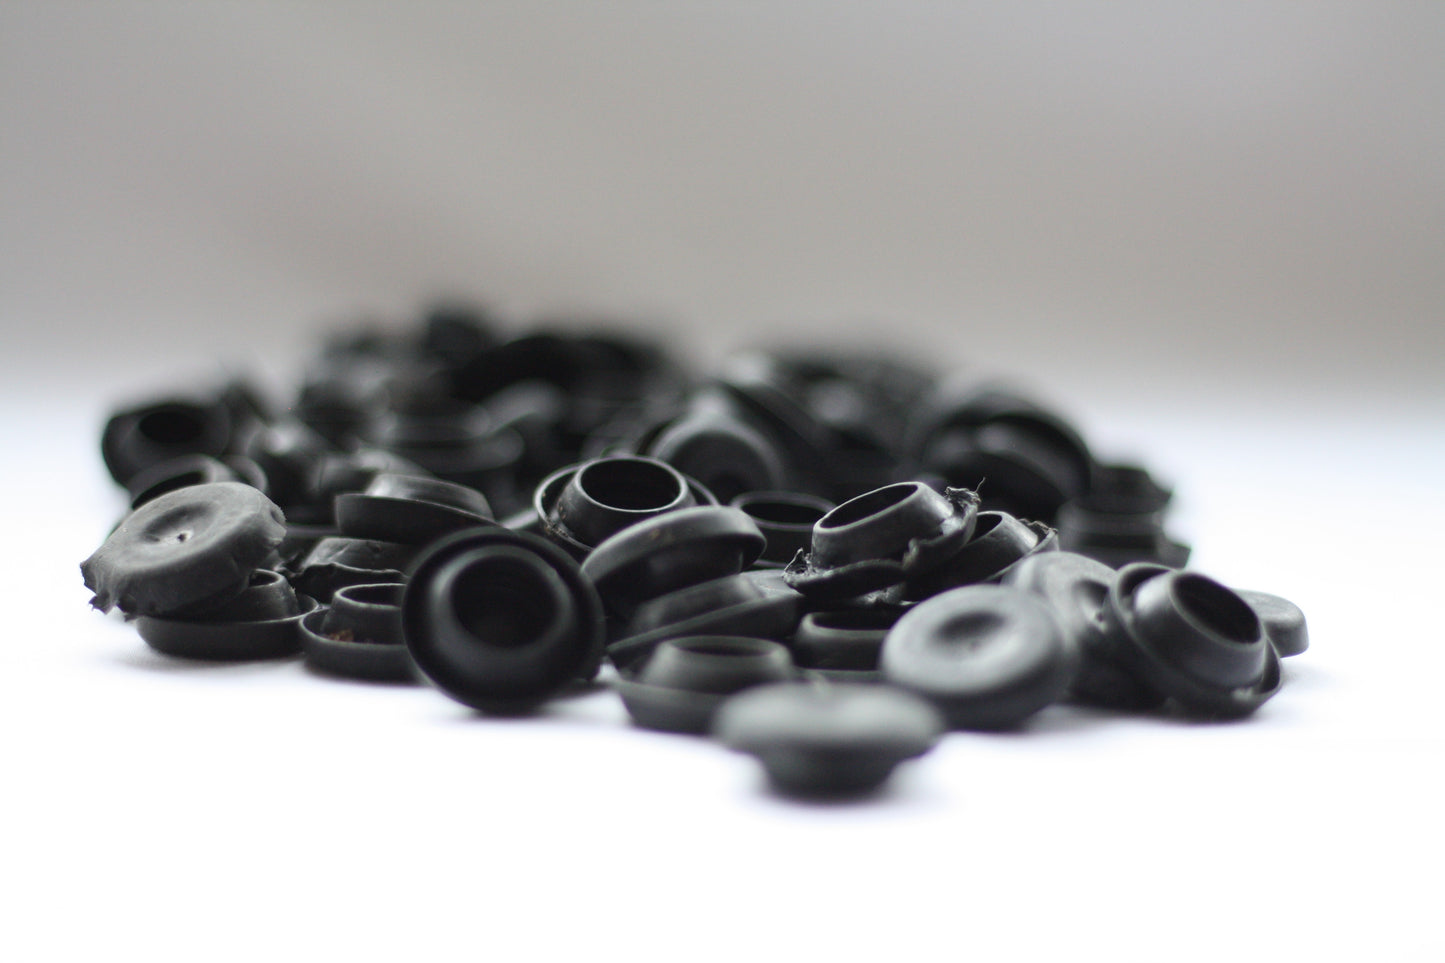 A collection of black rubber blanking plugs, sit against a white surface.